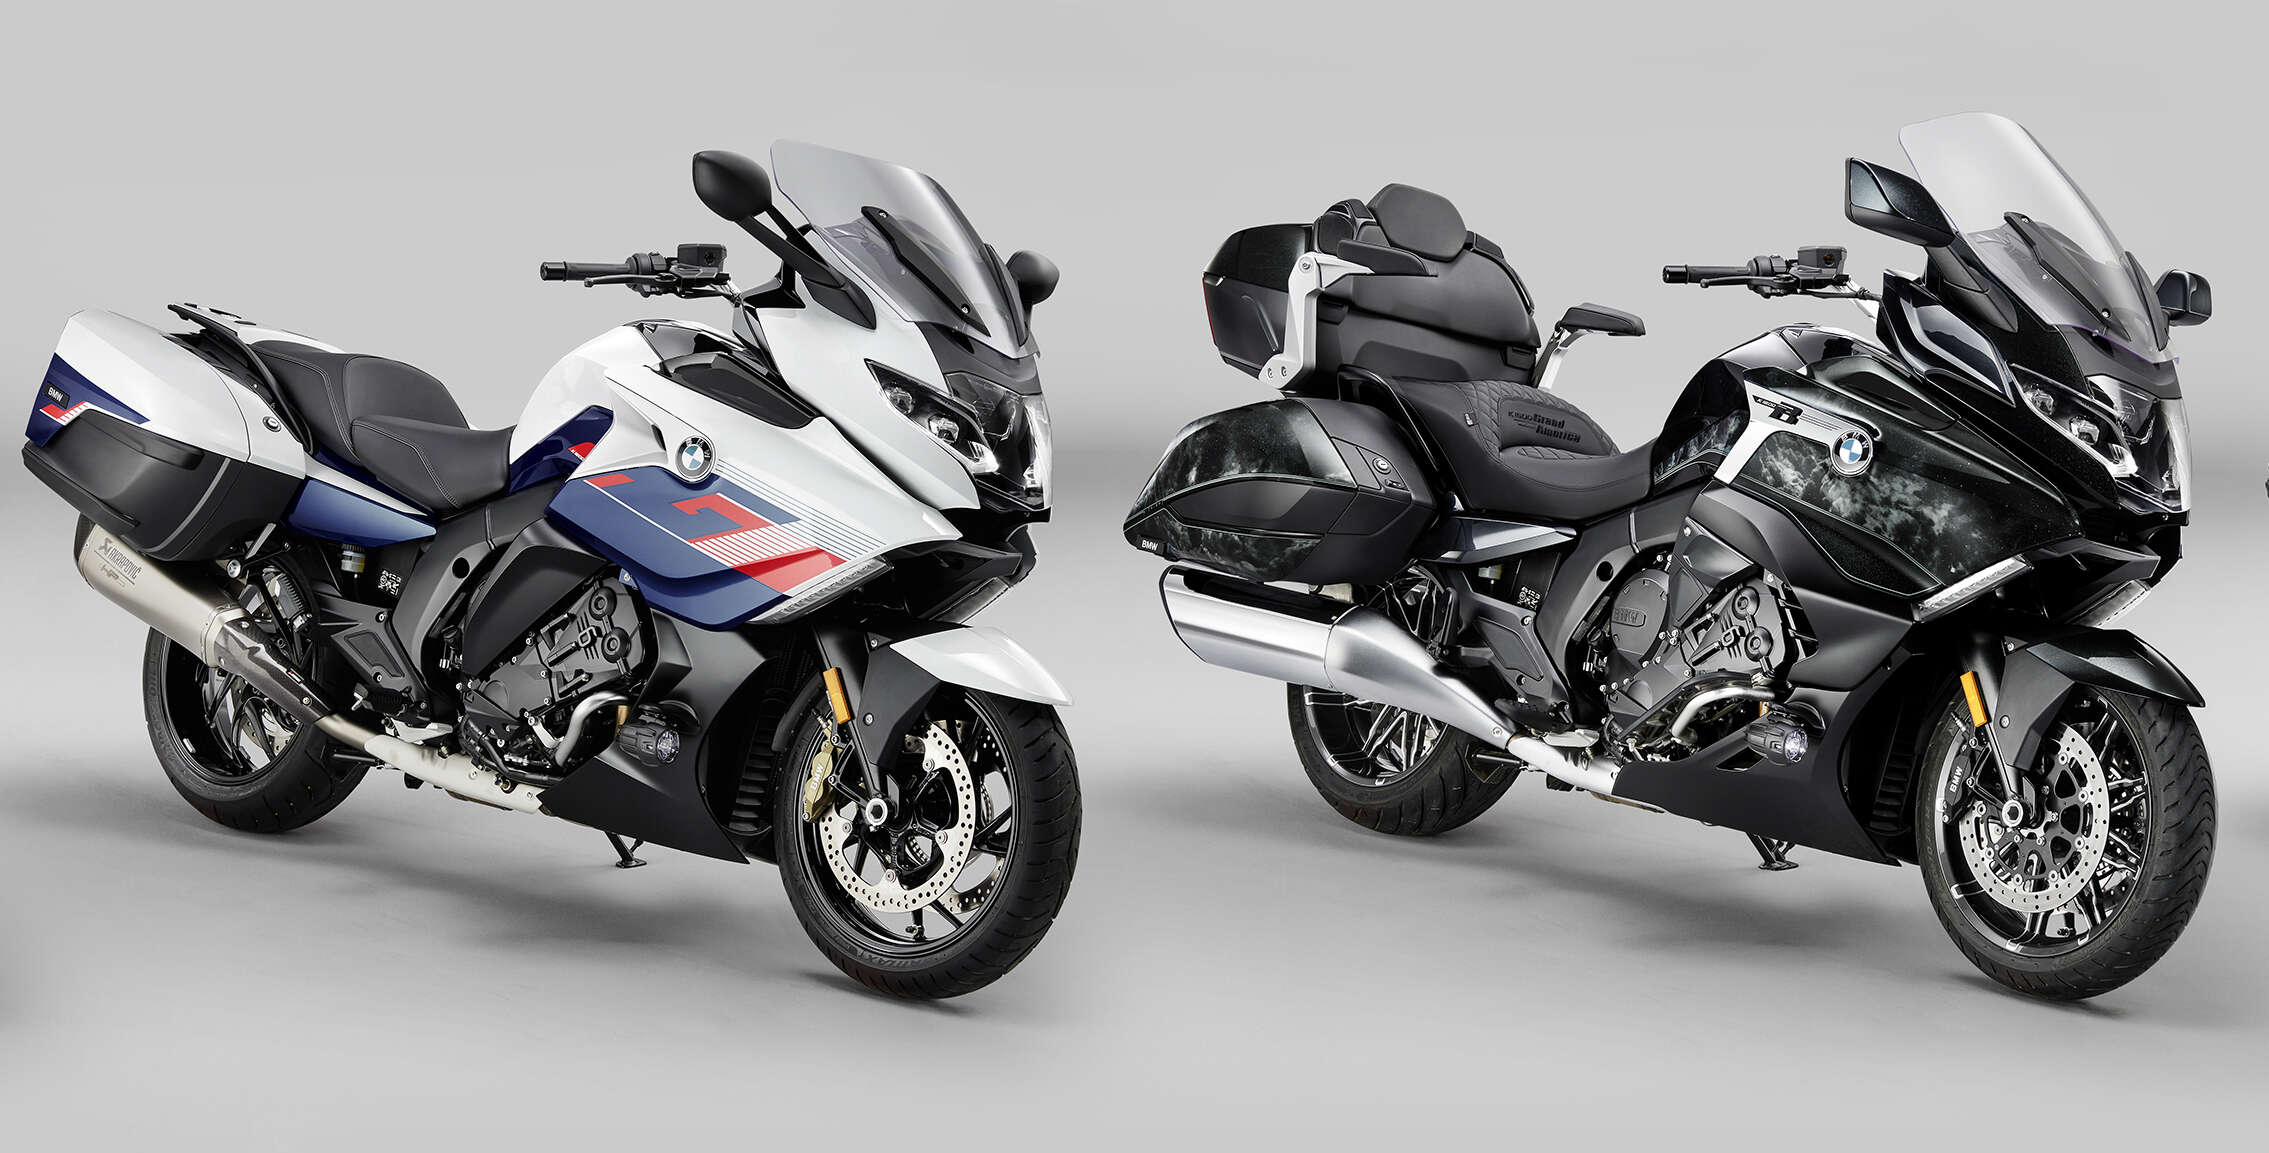 2023 BMW Motorrad K1600 GT, GTL tourers in Malaysia, priced at RM174,500  and RM183,500 